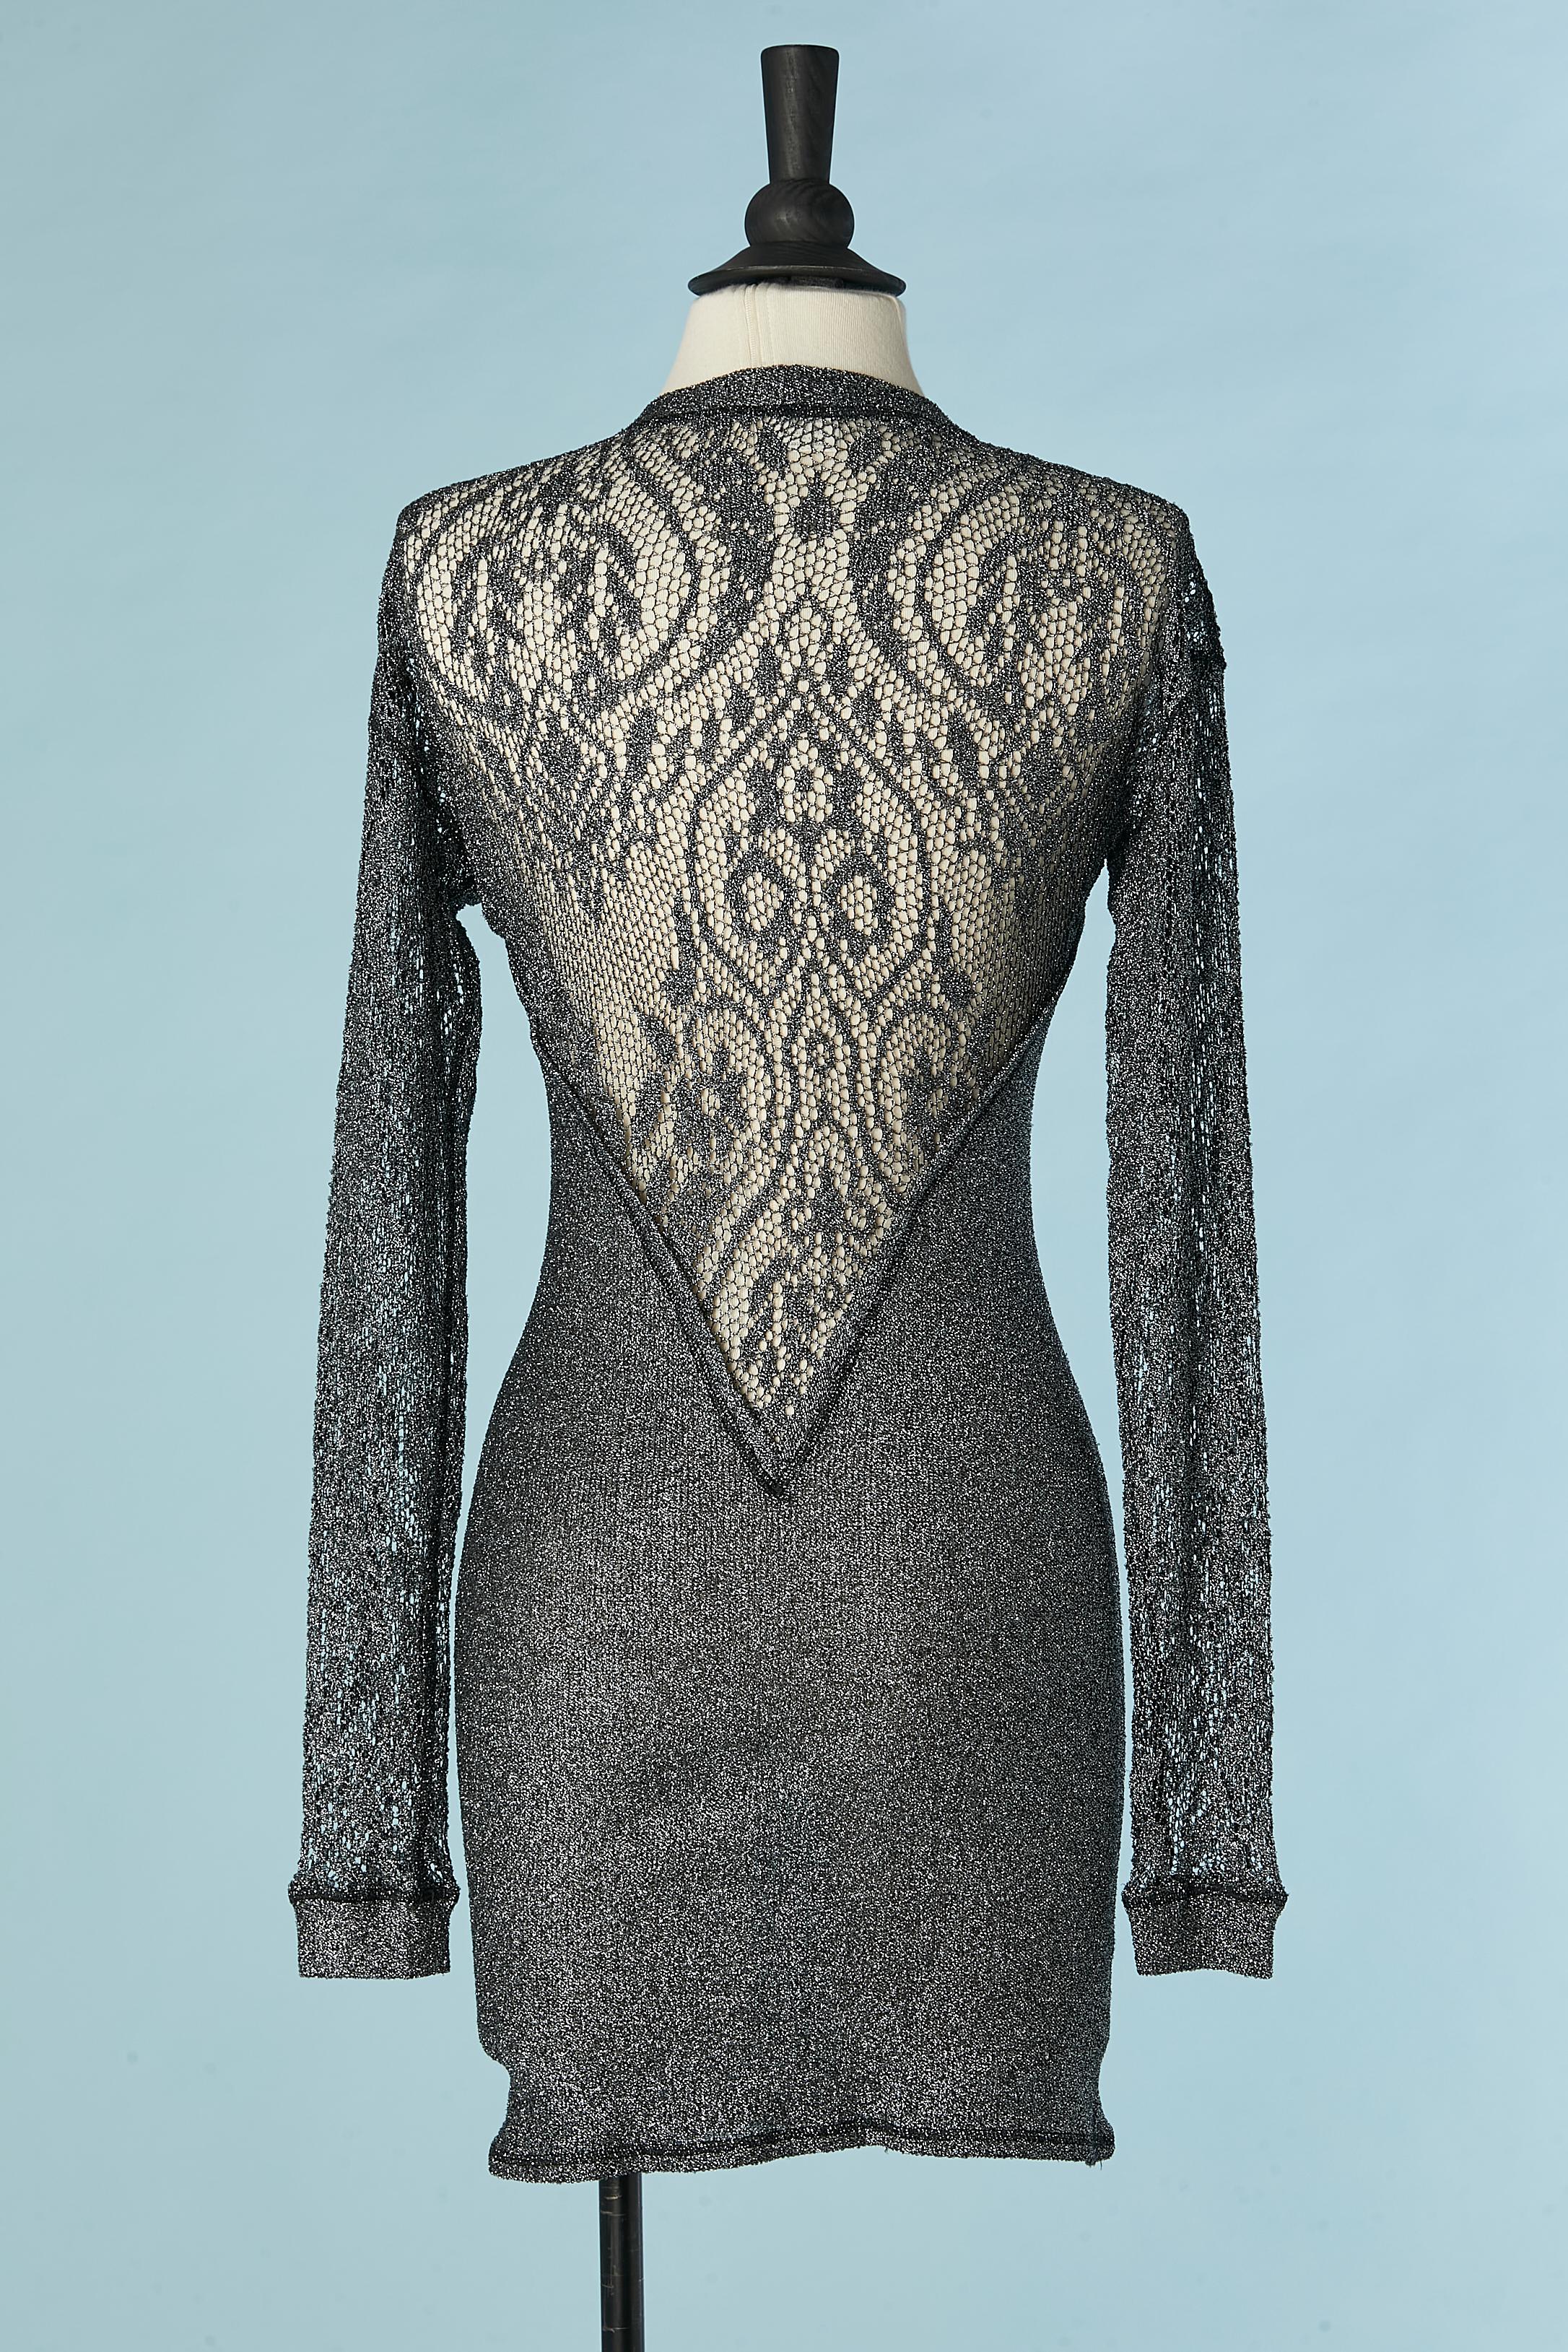 Silver lurex knit and lace cocktail dress Chantal THOMASS Circa 1990's  For Sale 2